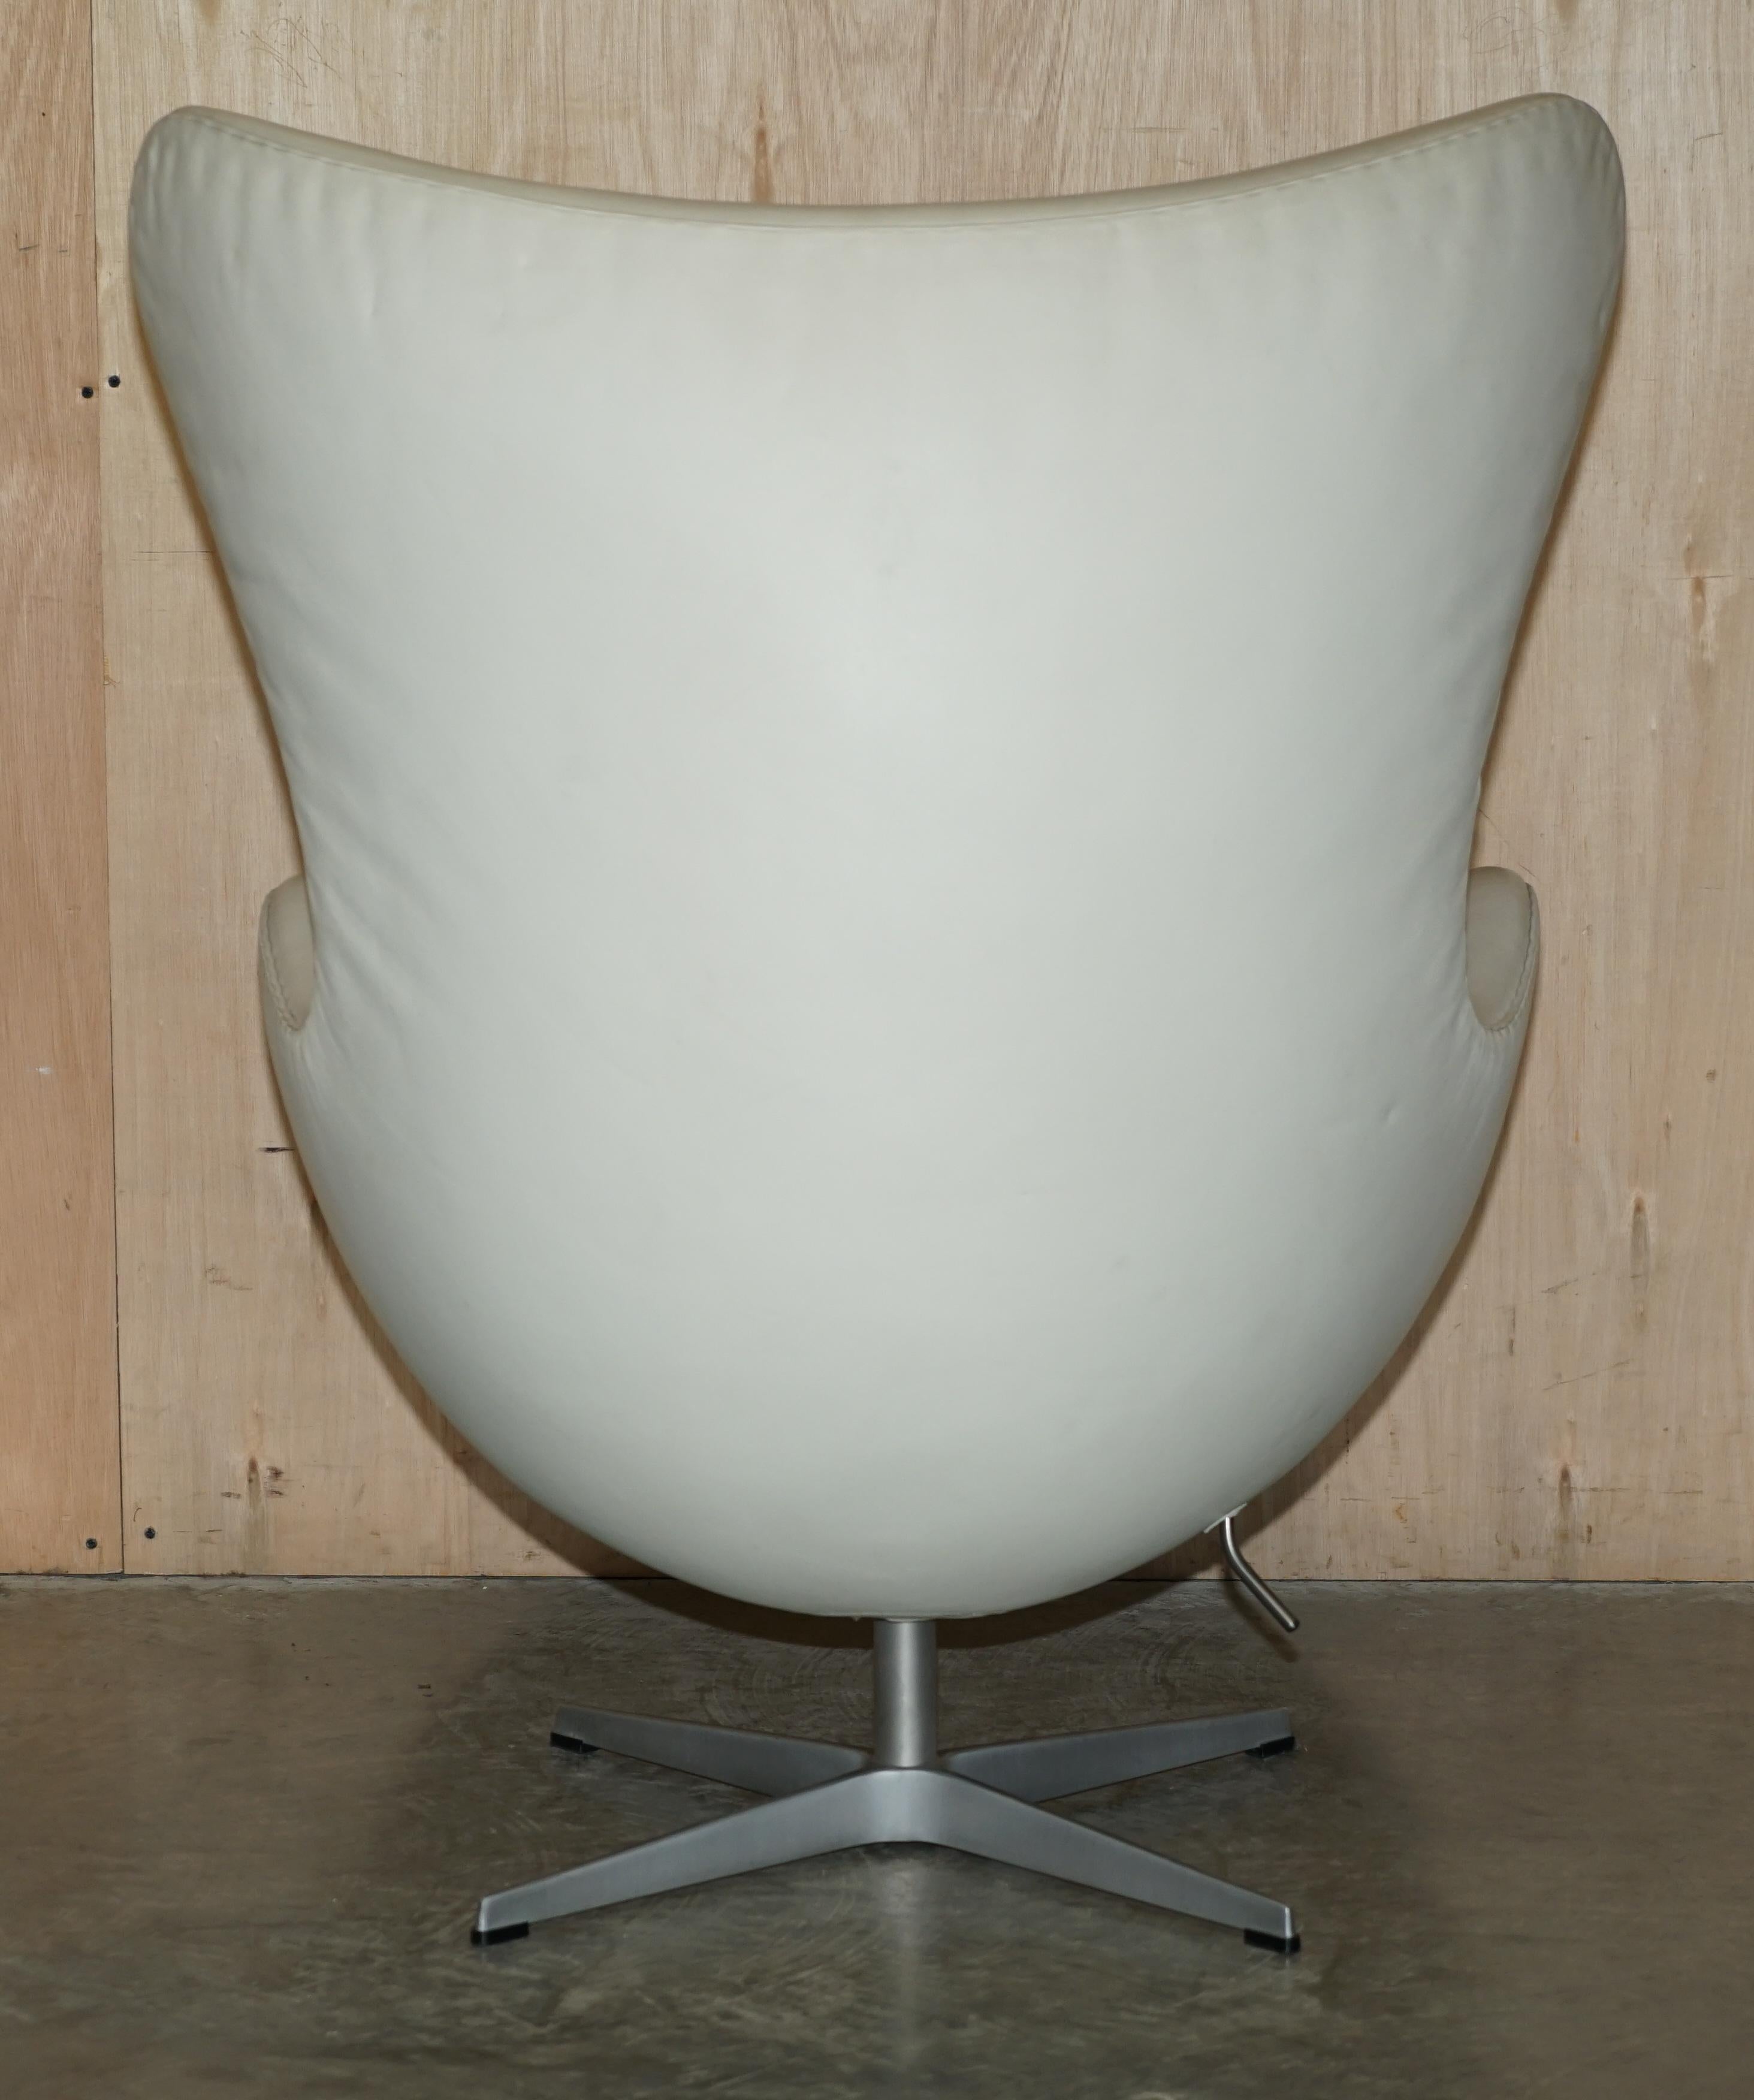 Stamped Fritz Hansen Cream Leather Egg Chair & Ottoman Footstool For Sale 7